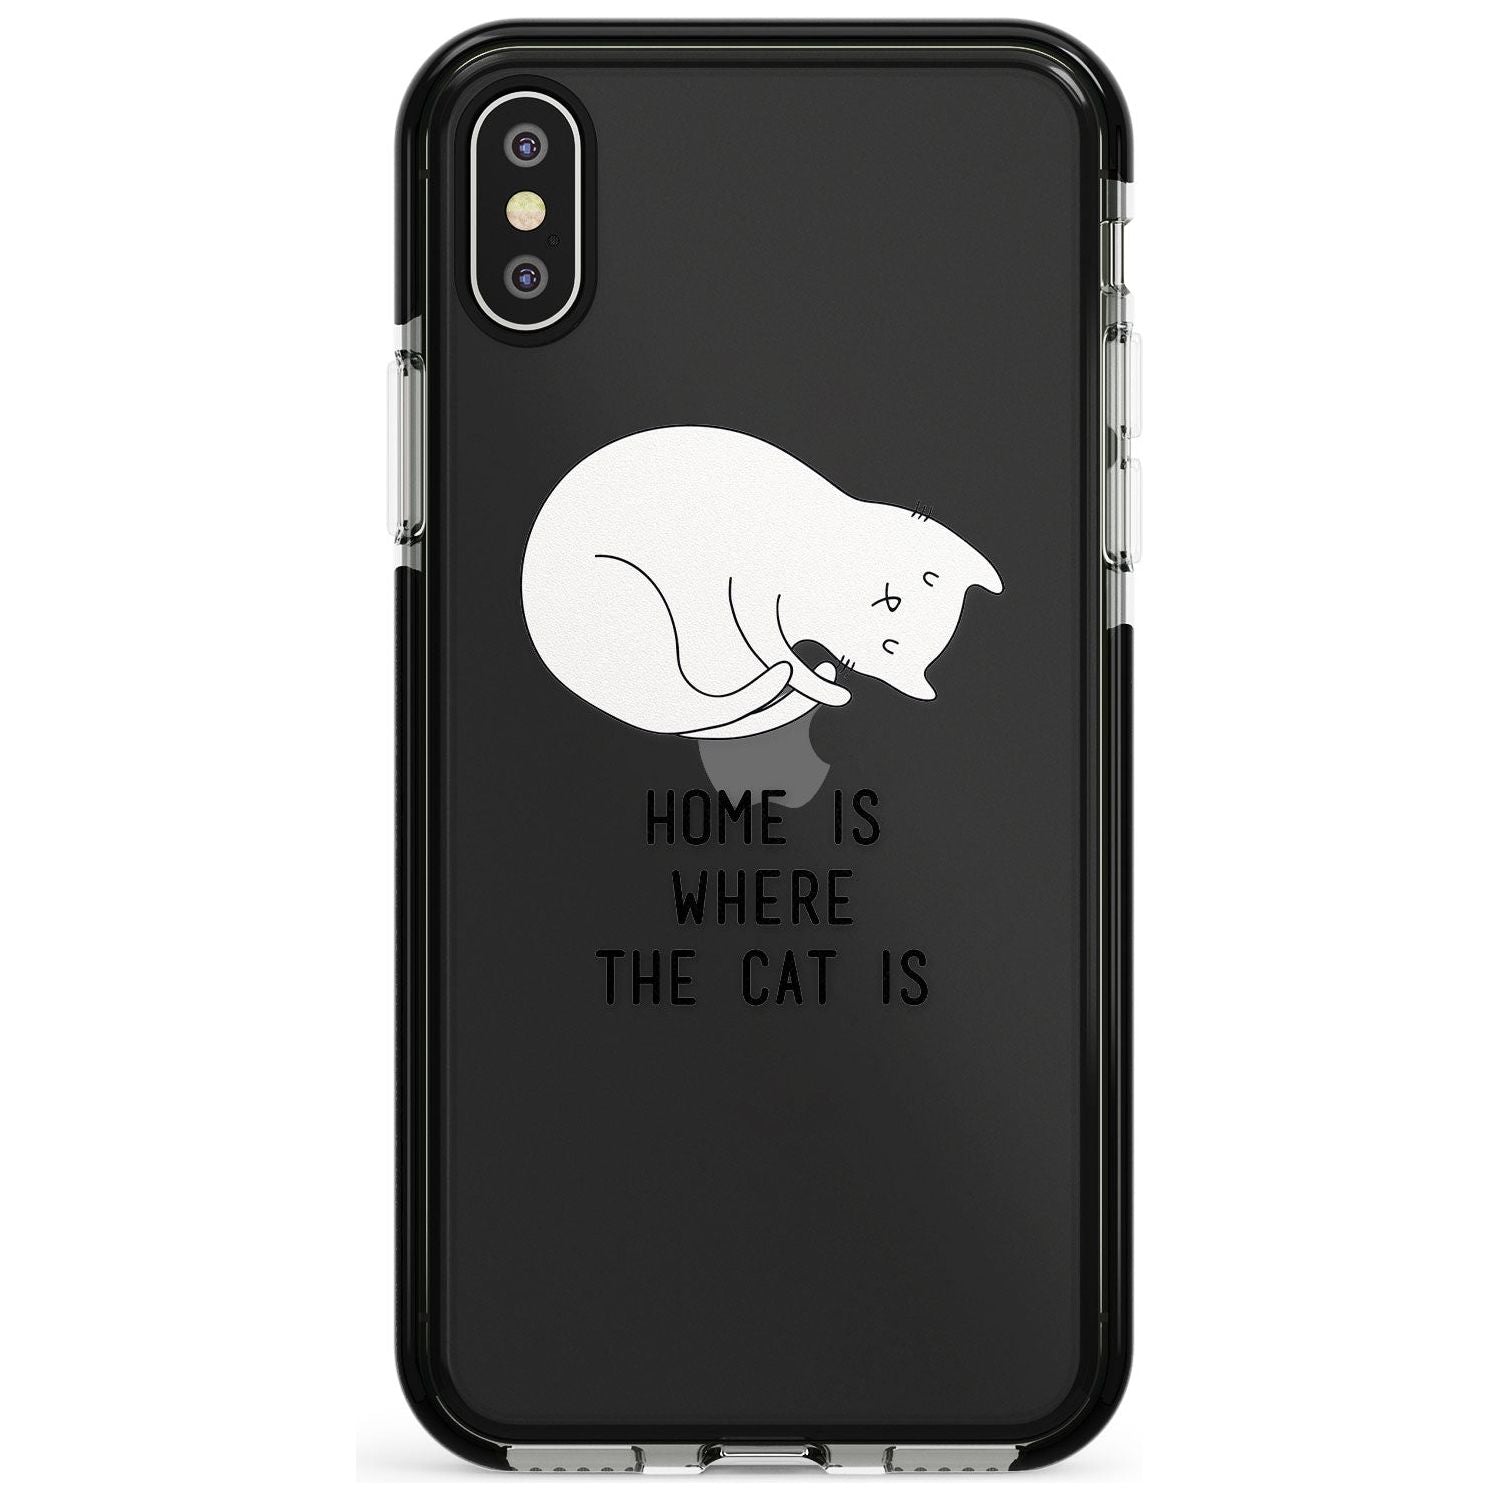 Home Is Where the Cat is Pink Fade Impact Phone Case for iPhone X XS Max XR